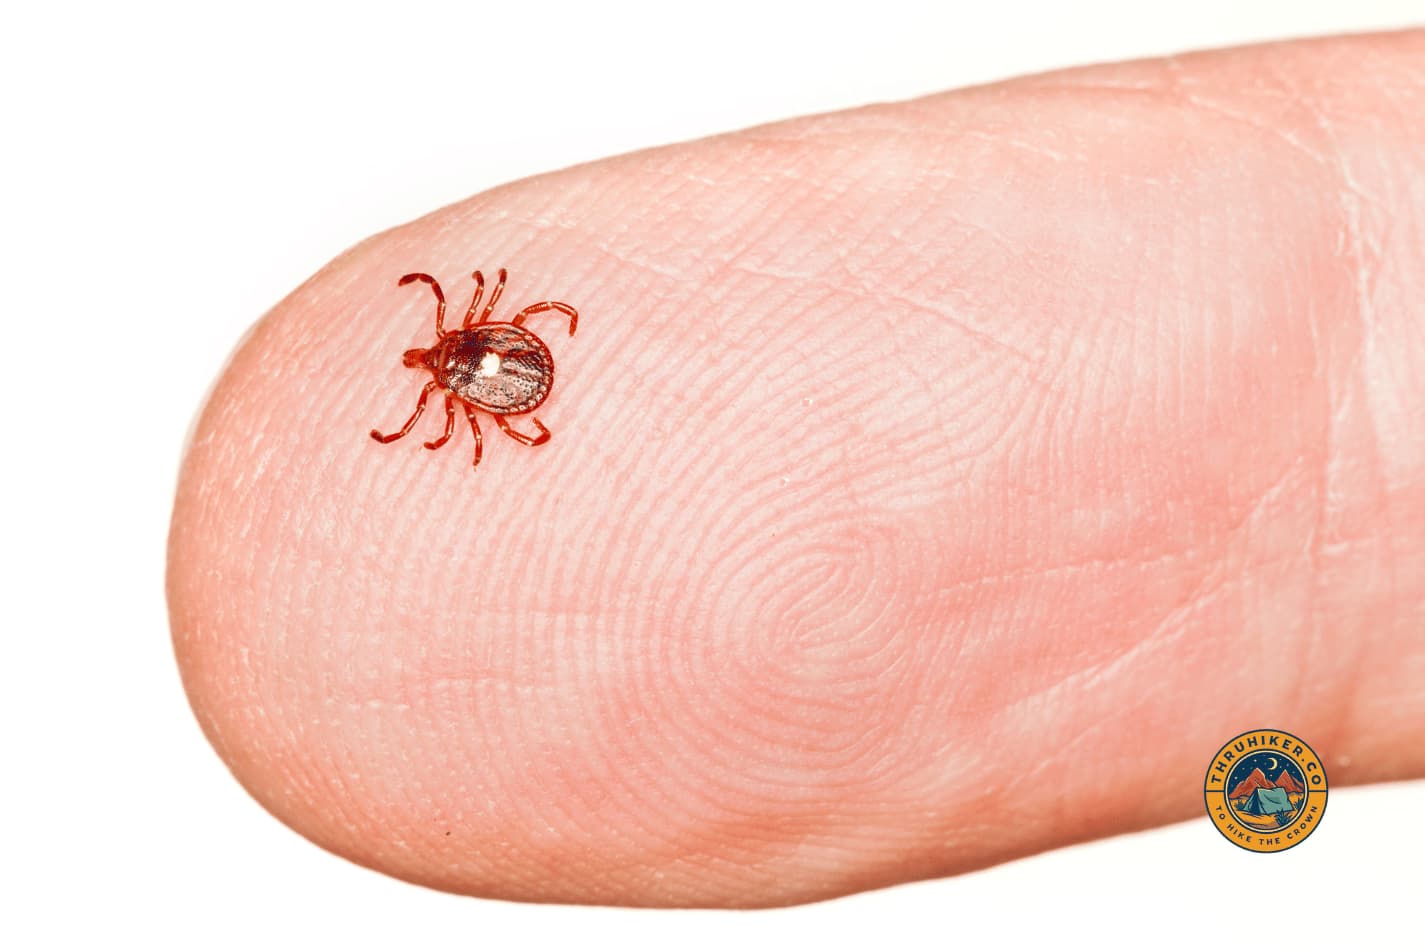 Lone Star tick on a finger showing the size and dangers ticks present